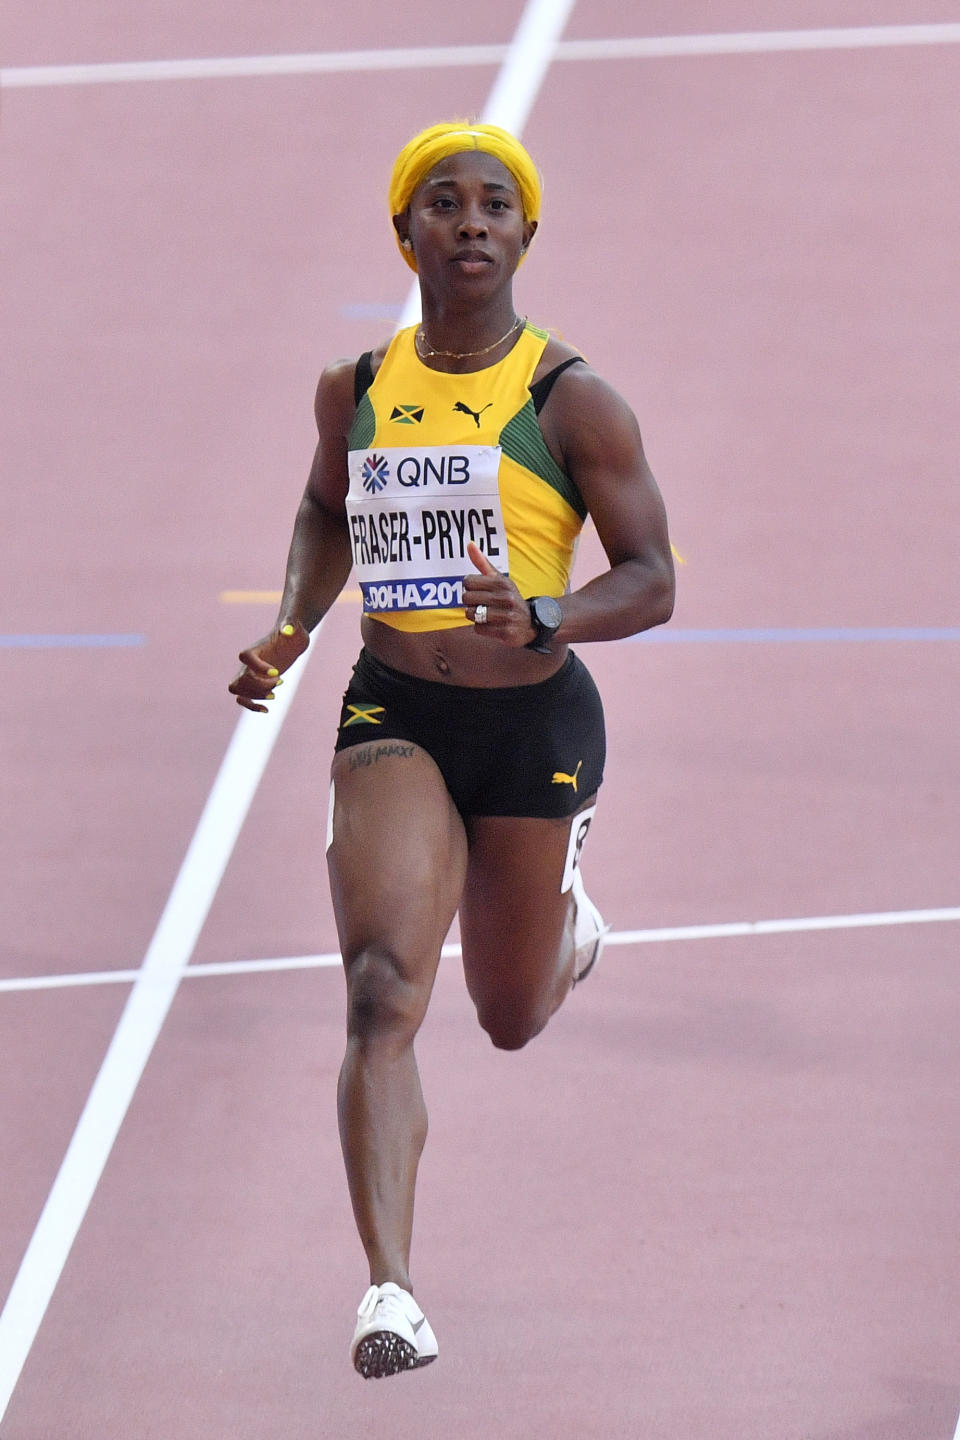 Shelly-Ann Fraser-Pryce, of Jamaica, competes in in a women's 100 meter race heat during the World Athletics Championships in Doha, Qatar, Saturday, Sept. 28, 2019. (AP Photo/Martin Meissner)